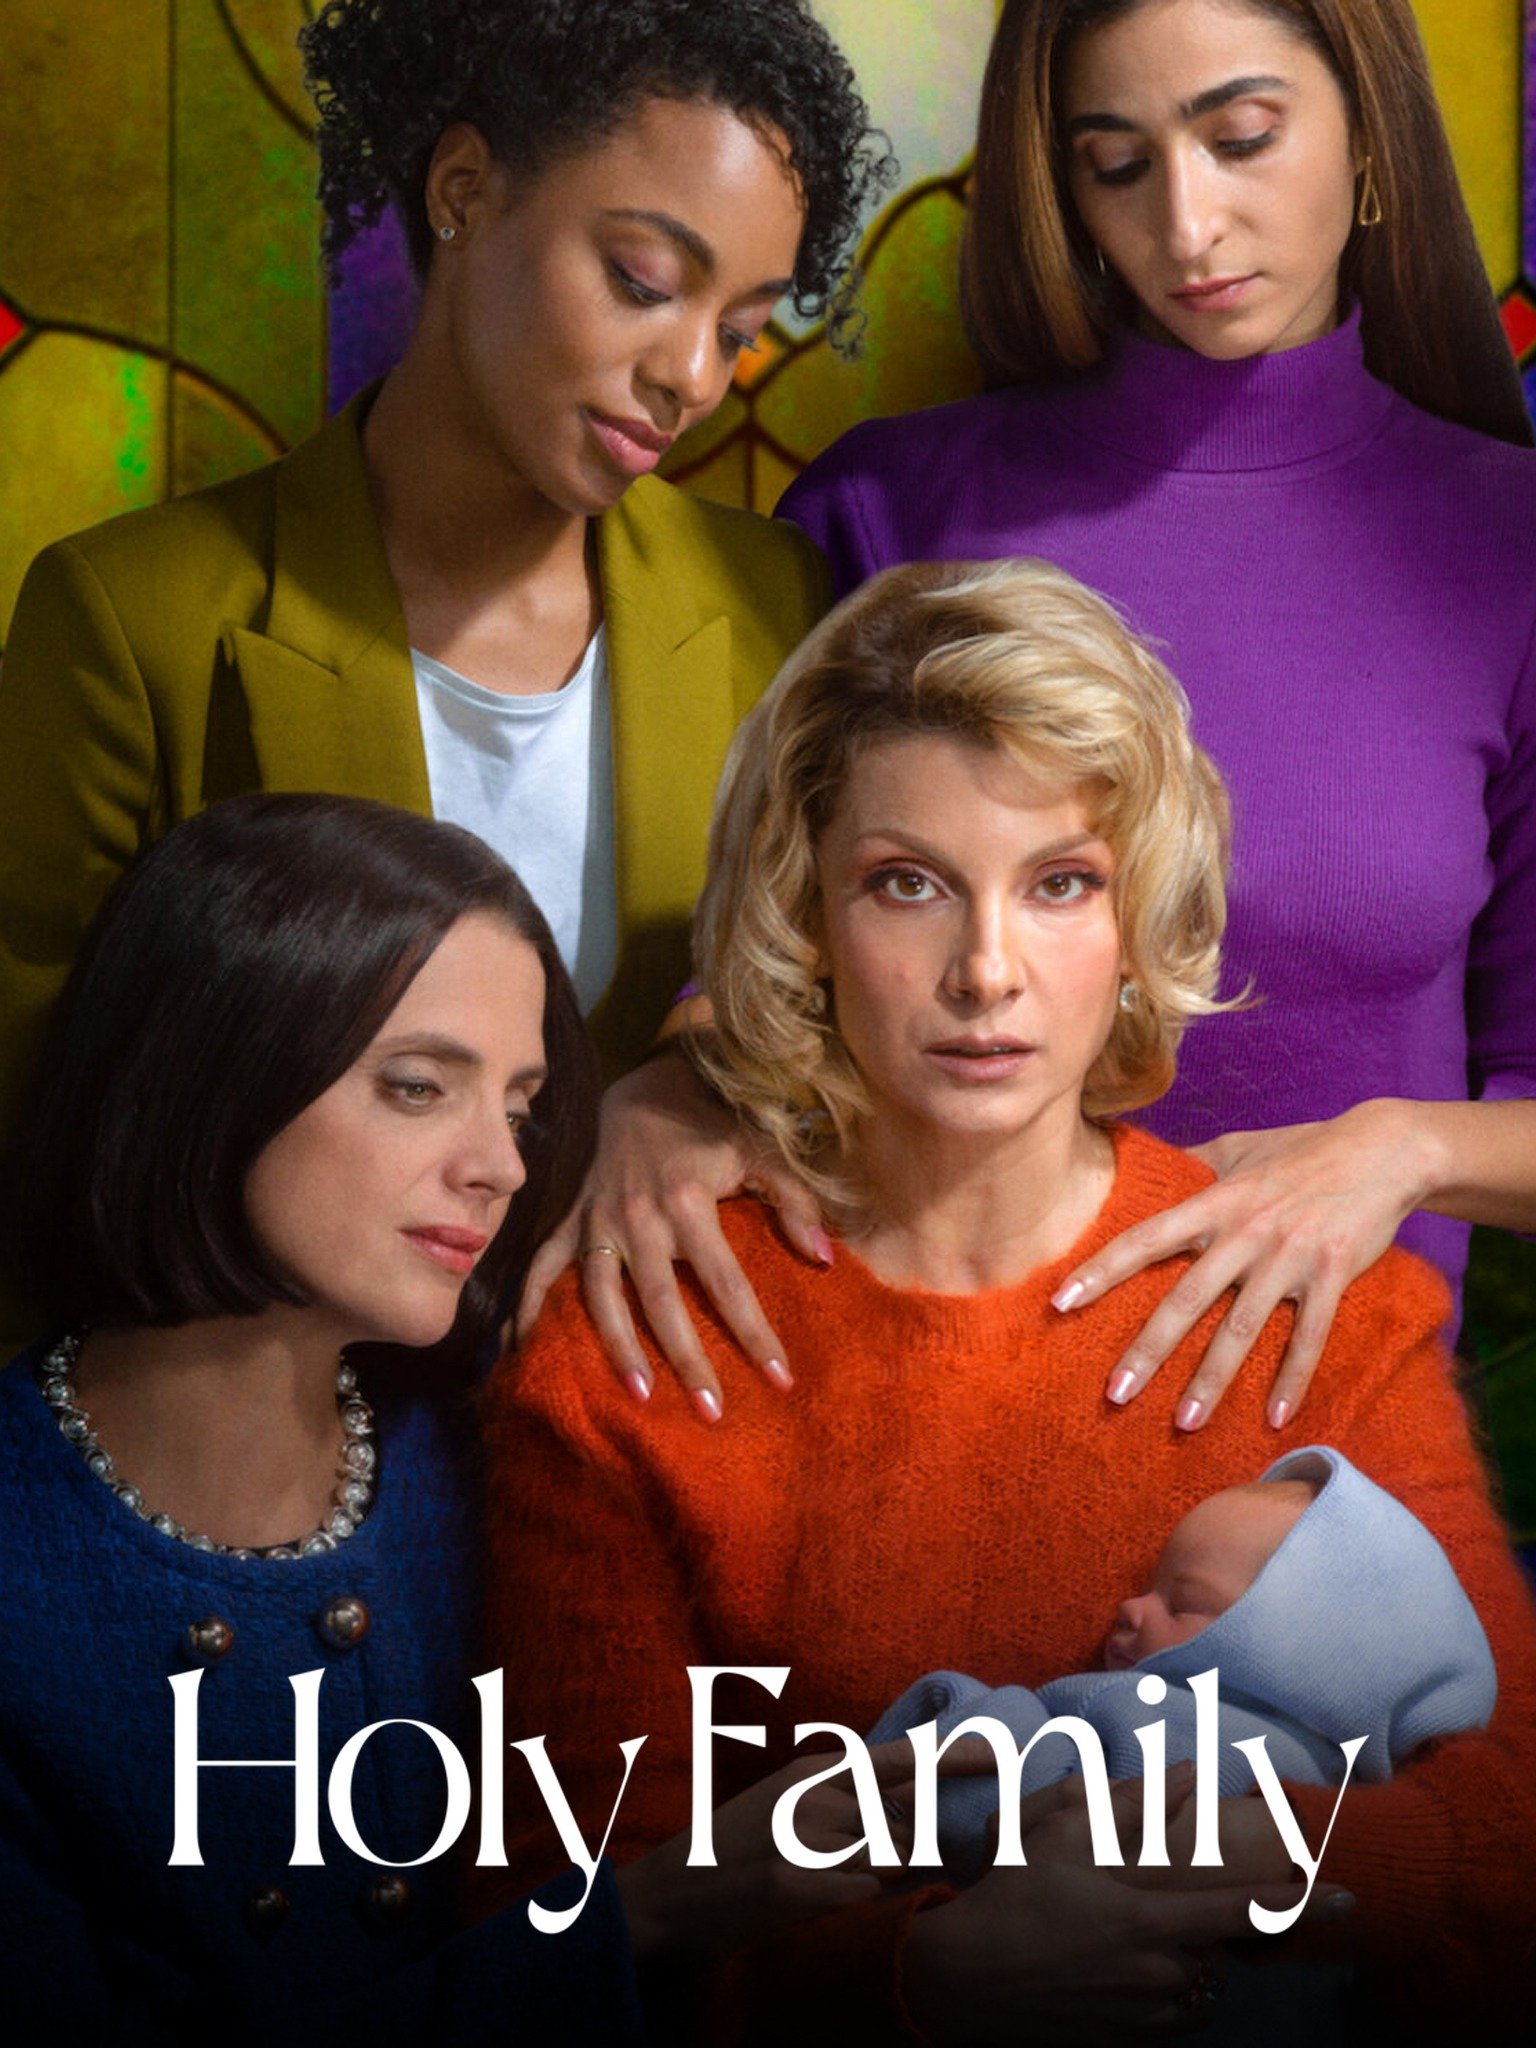 We Re Almost Family Now Porn - Holy Family - Rotten Tomatoes